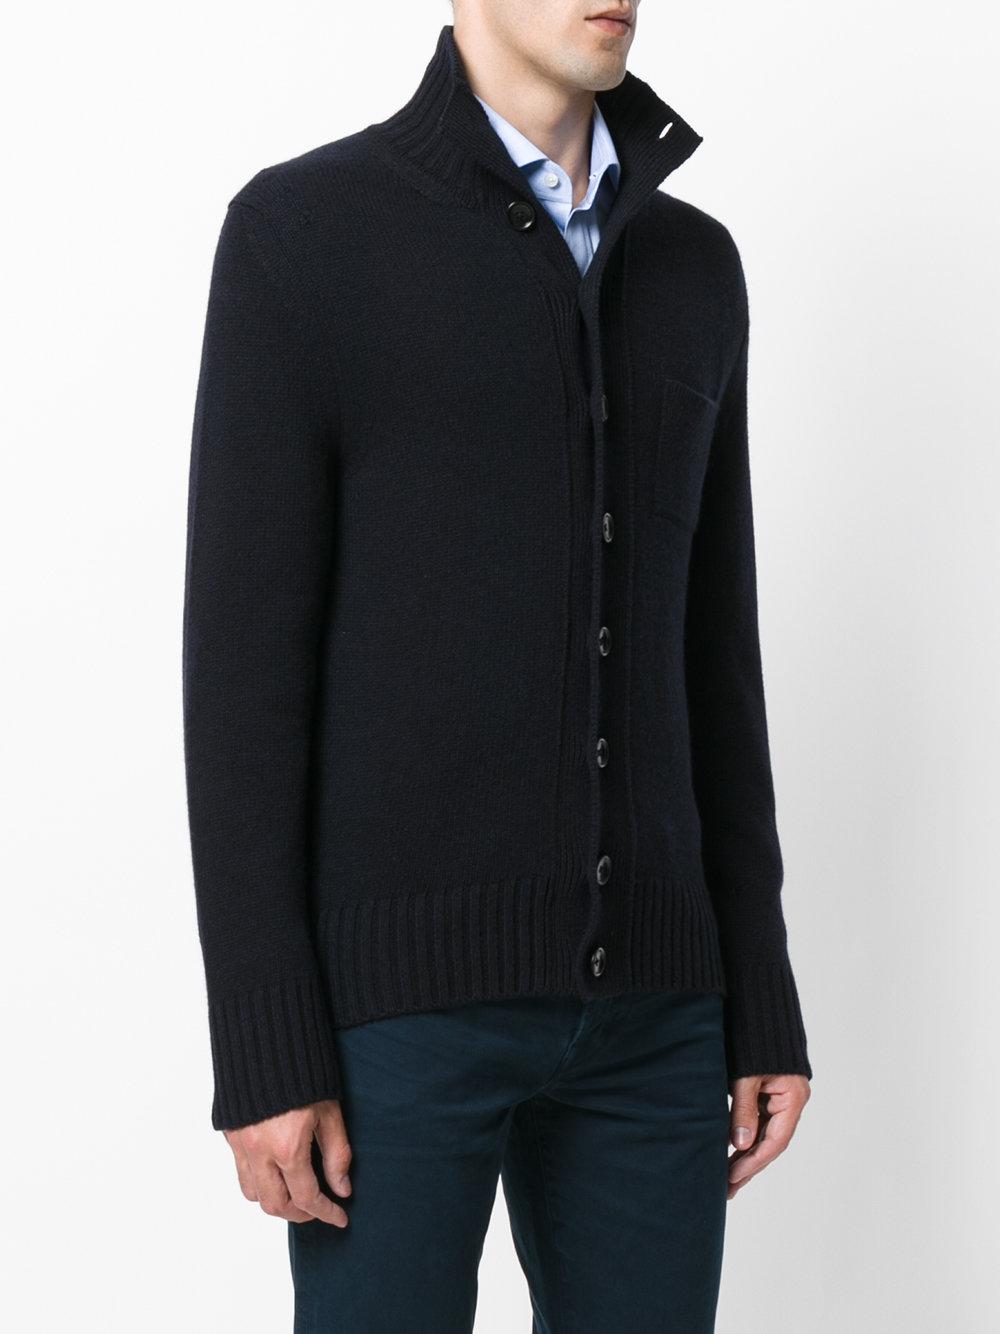 Lyst - Tom Ford Button Up Cardigan in Blue for Men